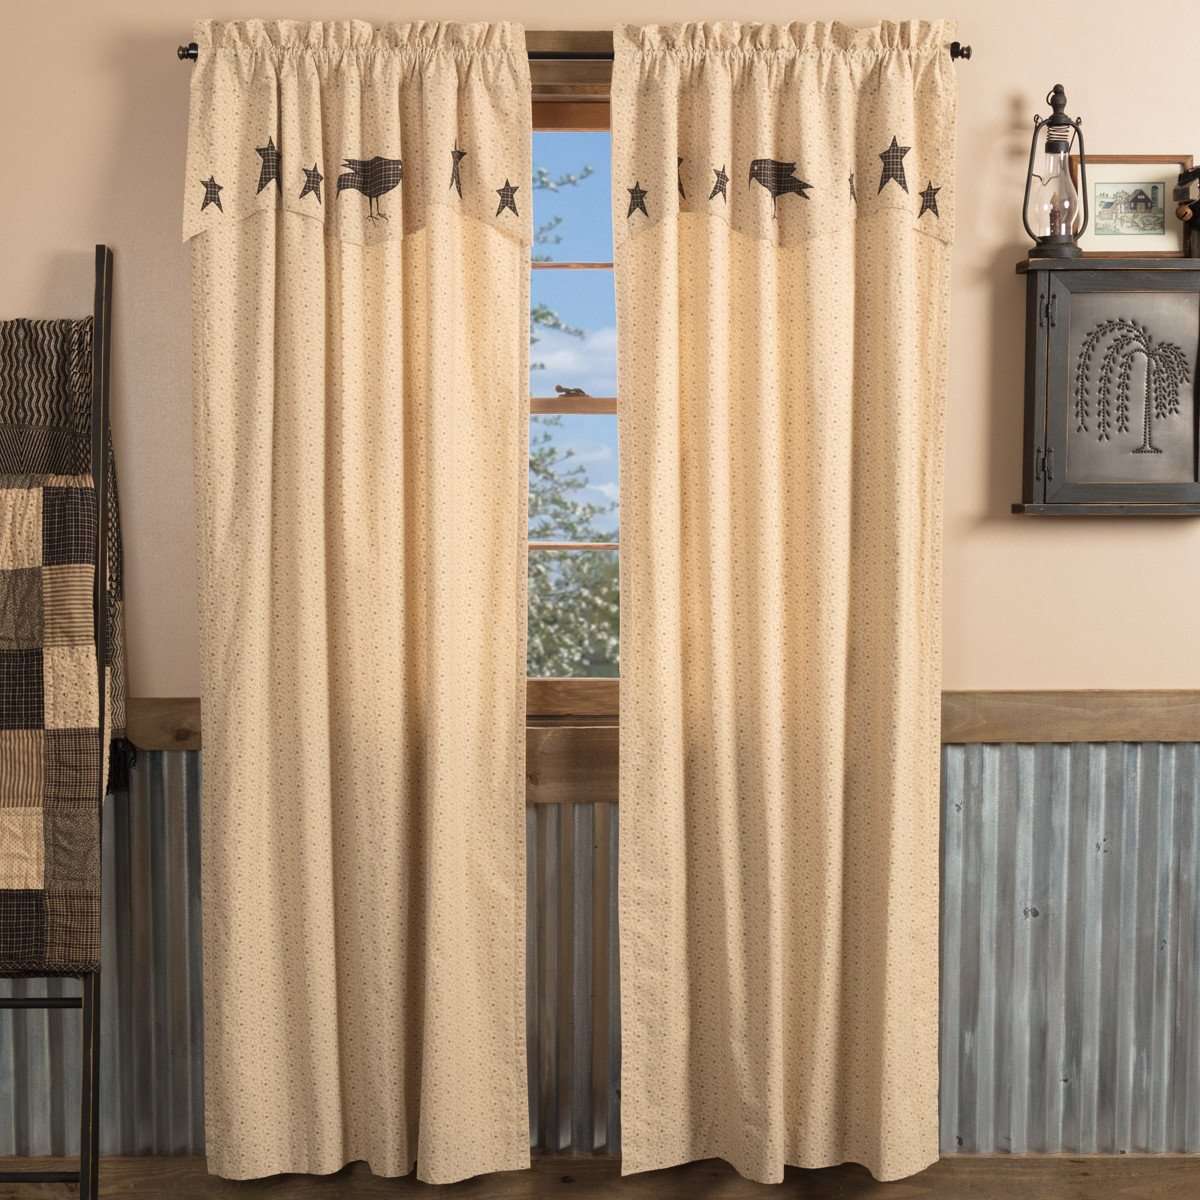 Kettle Grove Panel Curtain with Attached Applique Crow and Star Valance Set of 2 84x40 - The Fox Decor